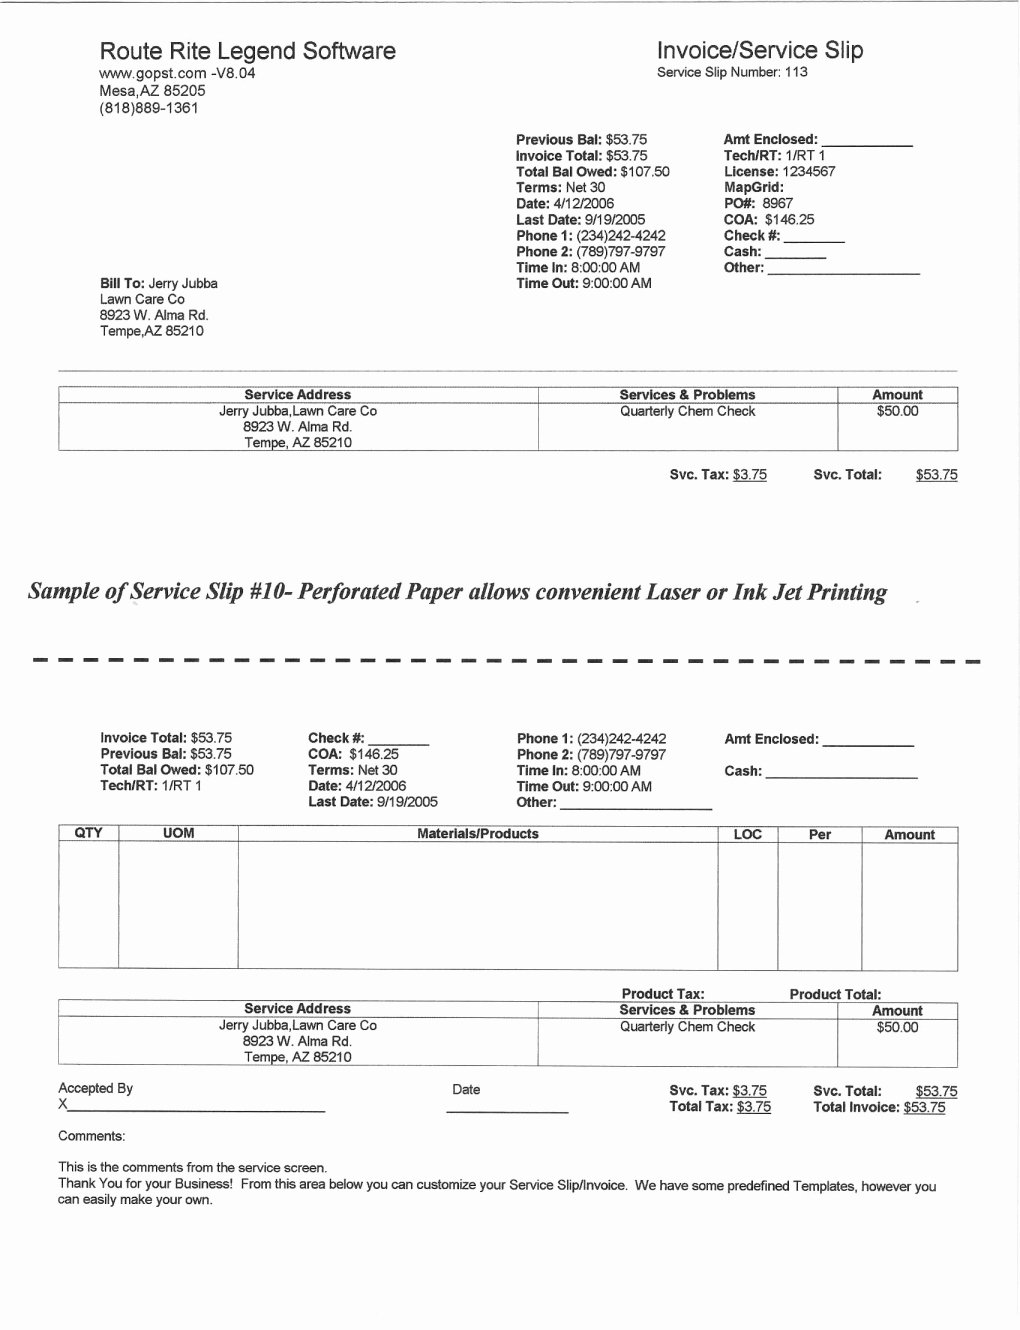 Carpet Cleaning Invoice Template Awesome Sample Carpet Cleaning Invoice Water Damage and Invoices